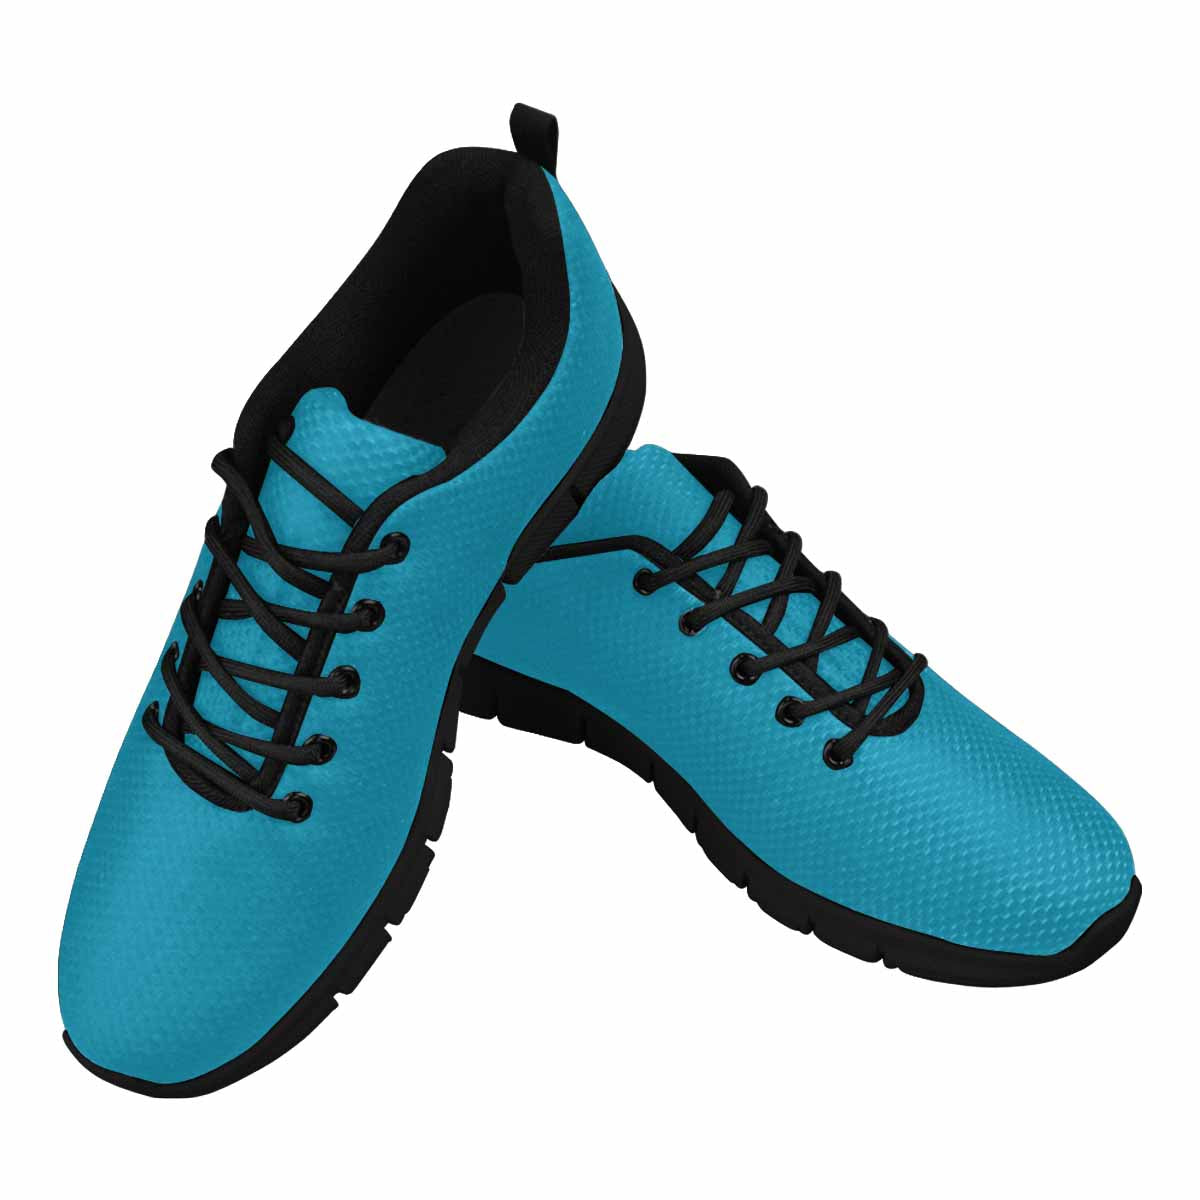 Sneakers For Men, Blue Green Running Shoes